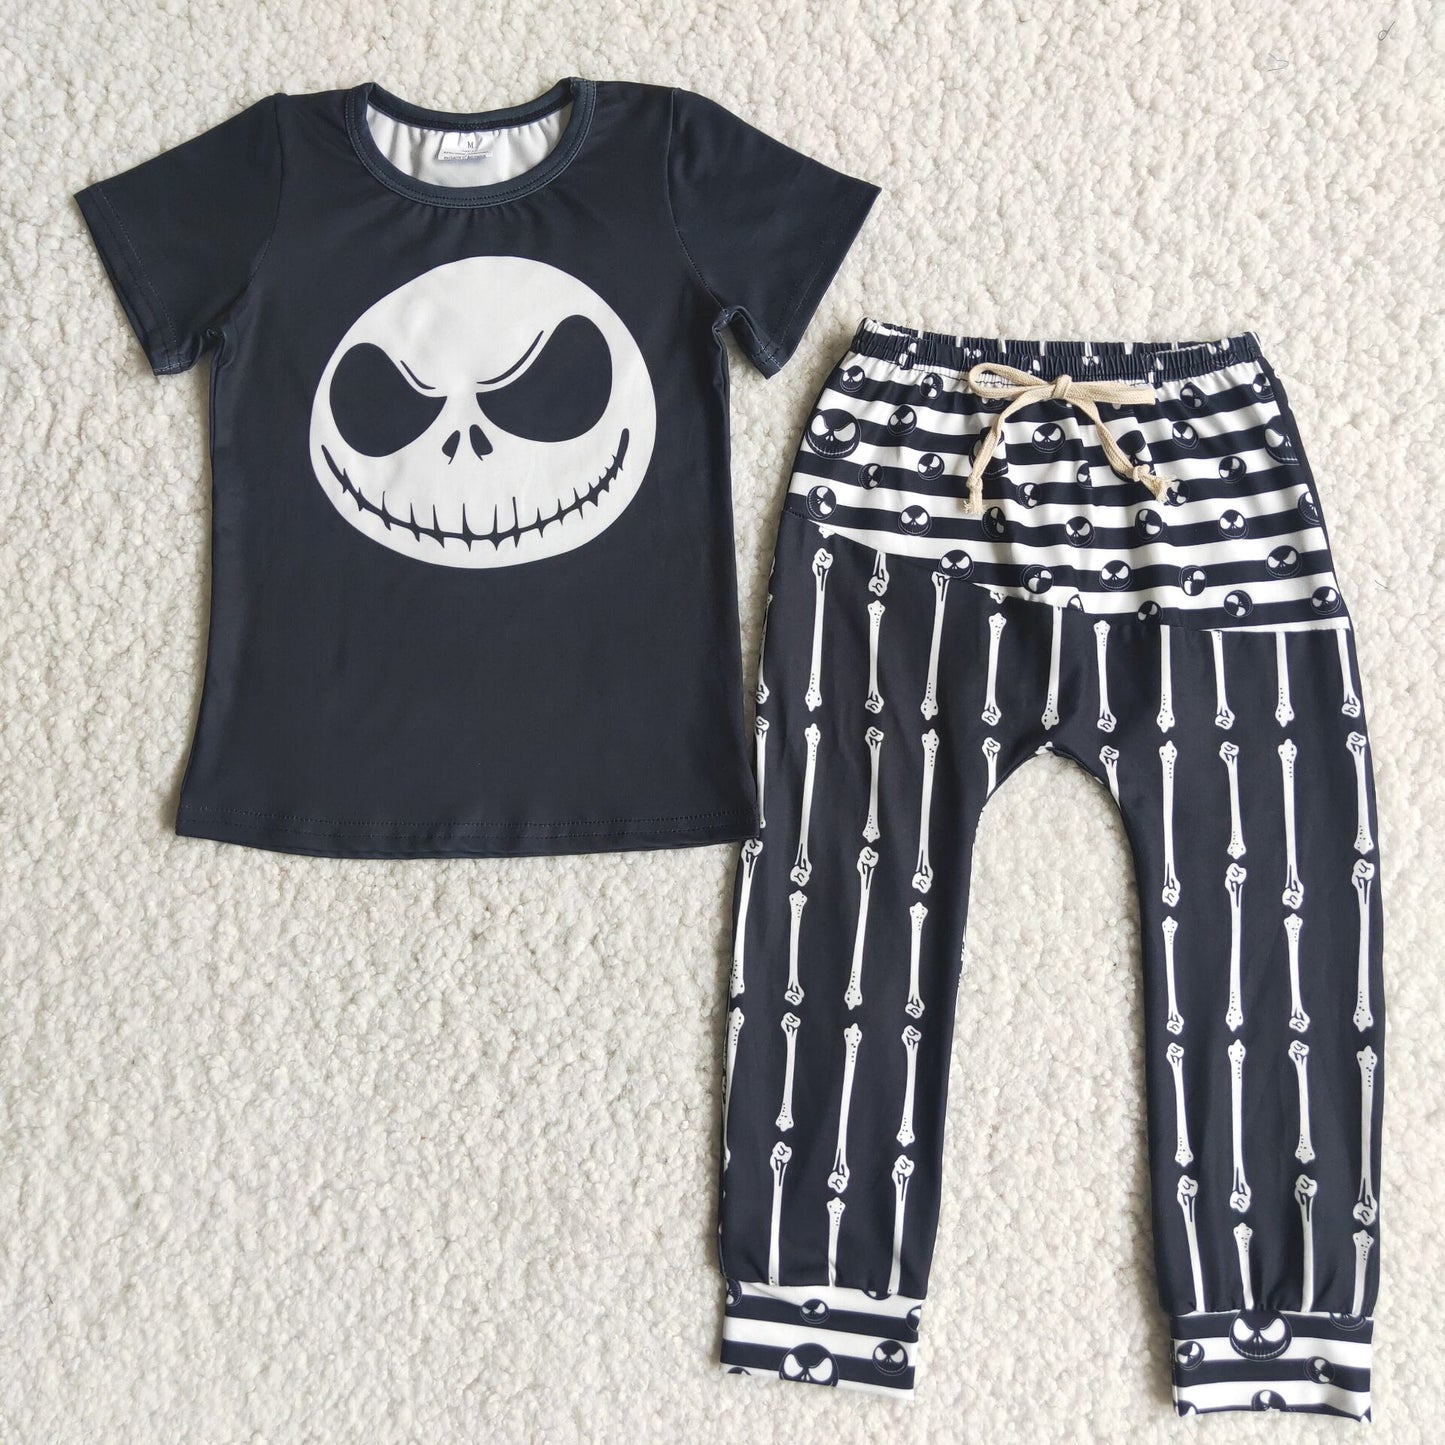 boy's outfit pants set for halloween